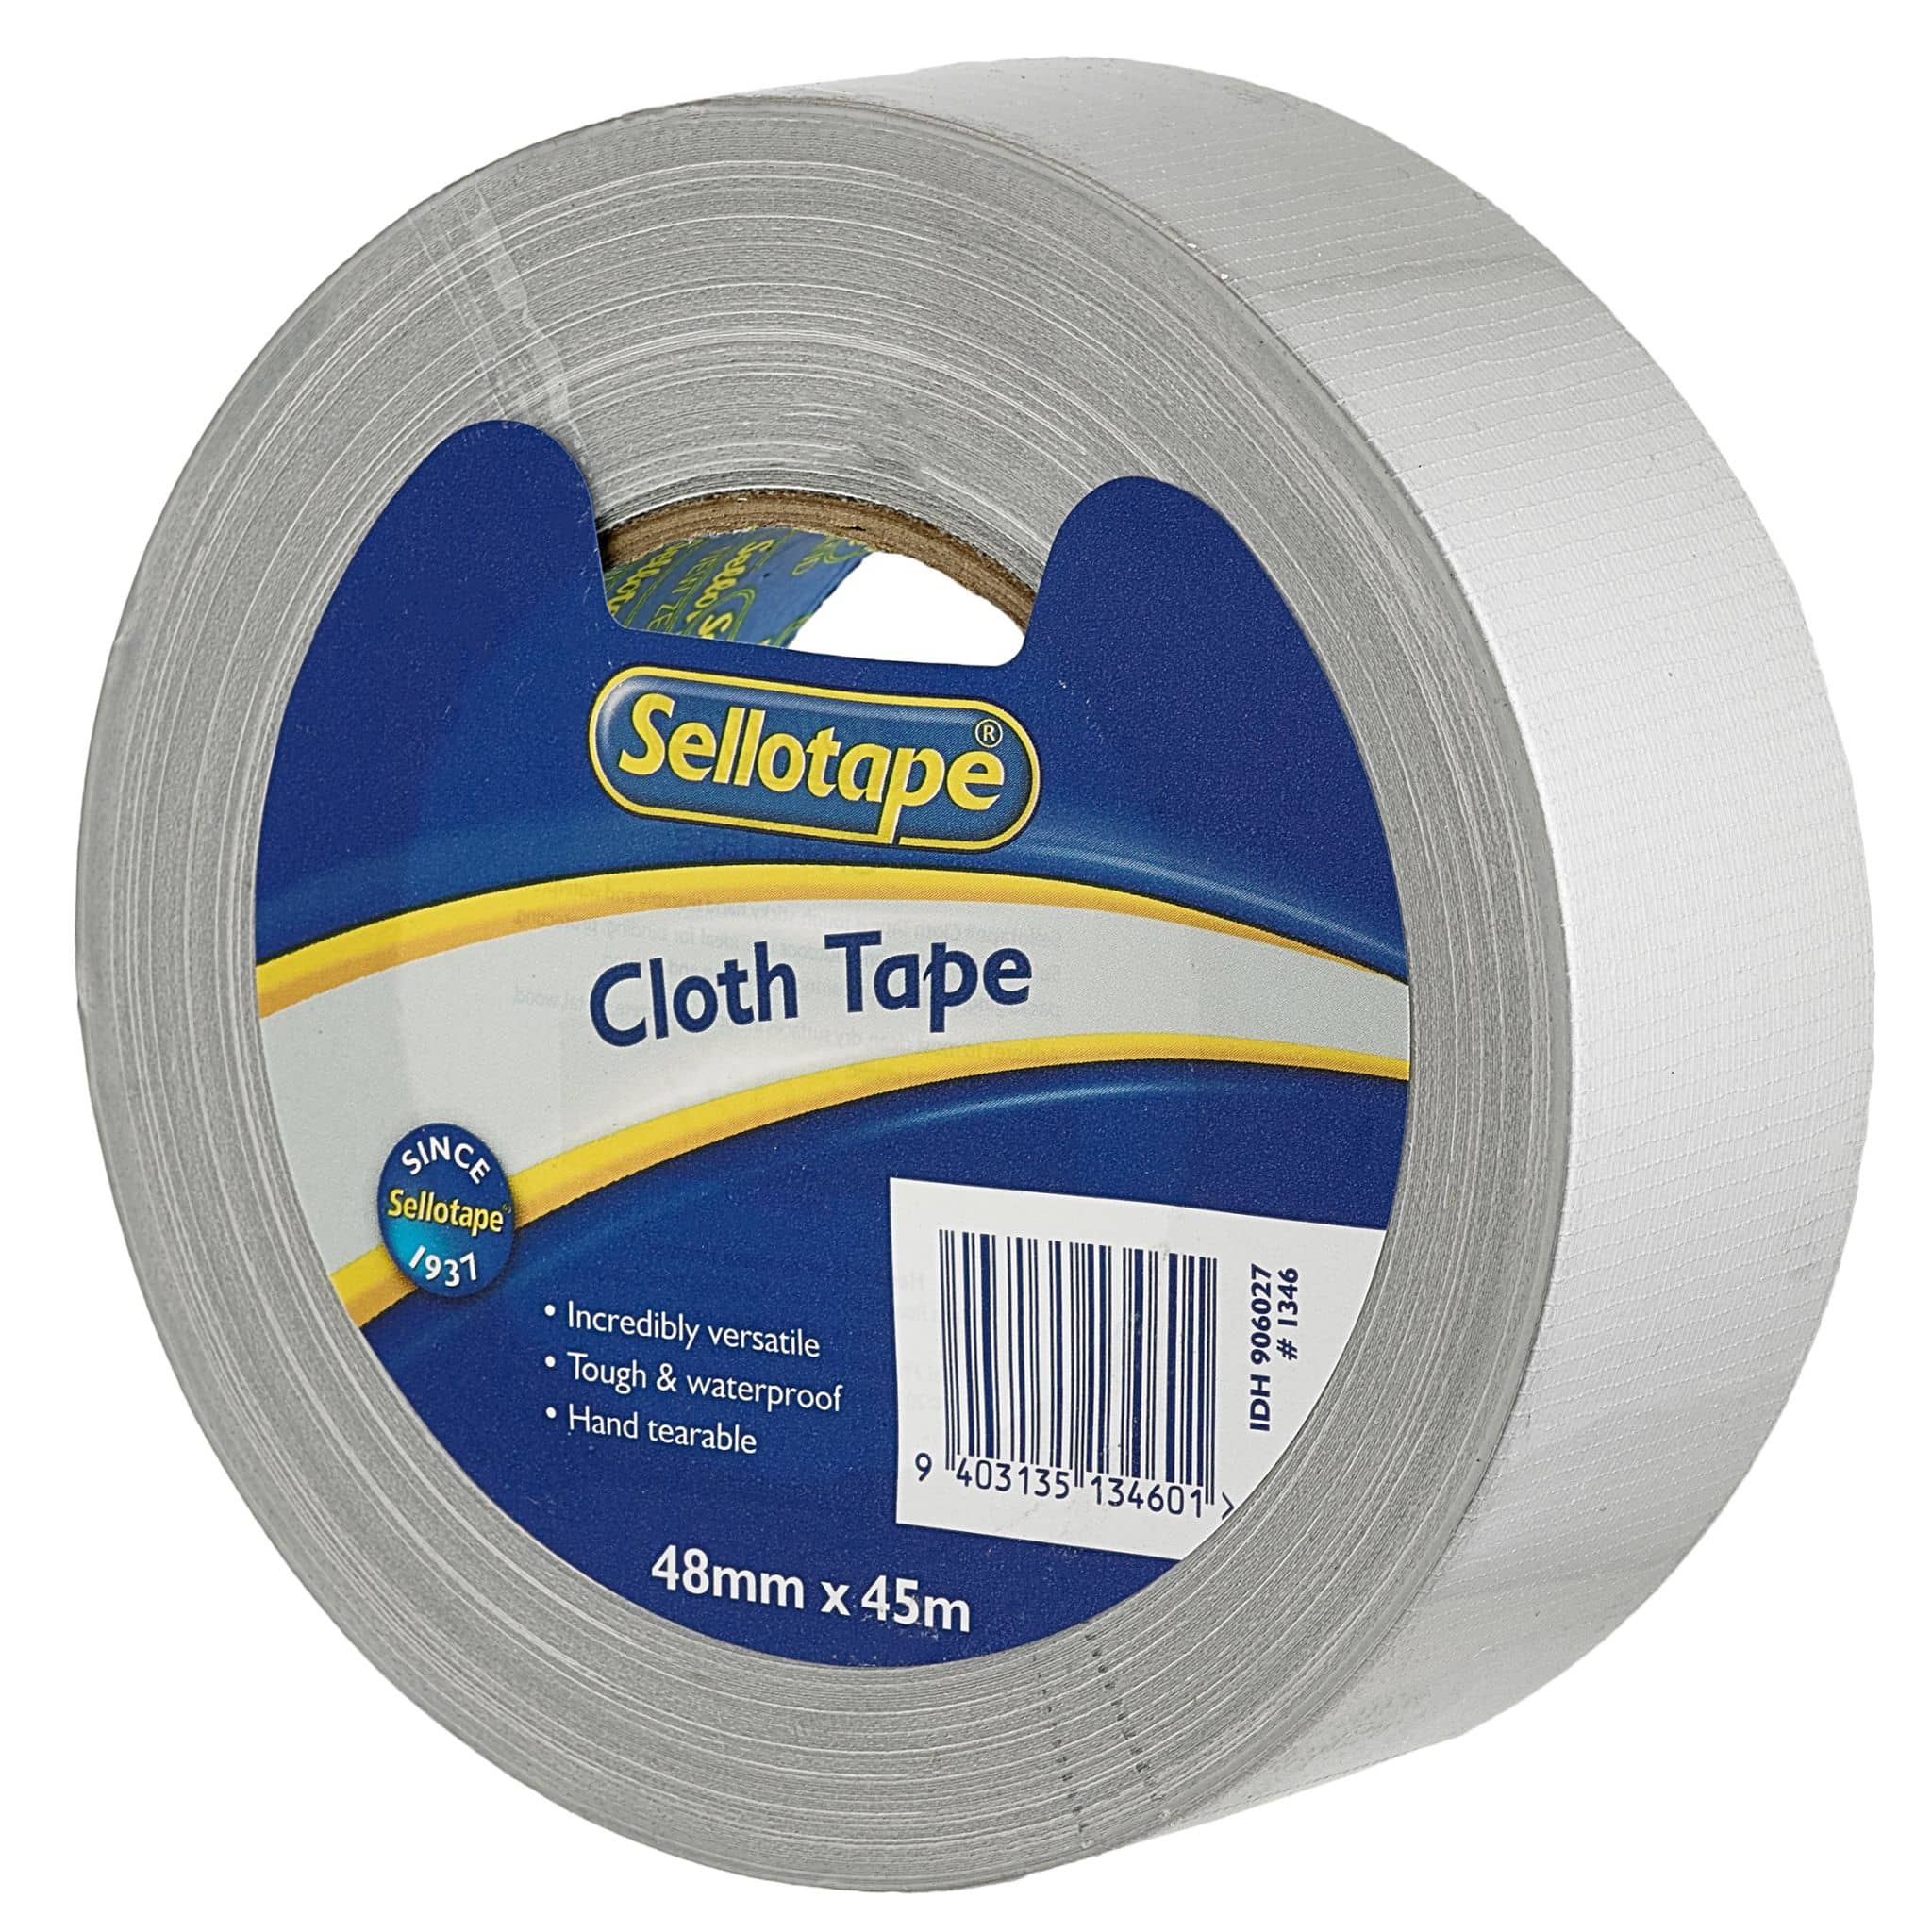 Sellotape 1346 Cloth Tape Silver 48mmx45m